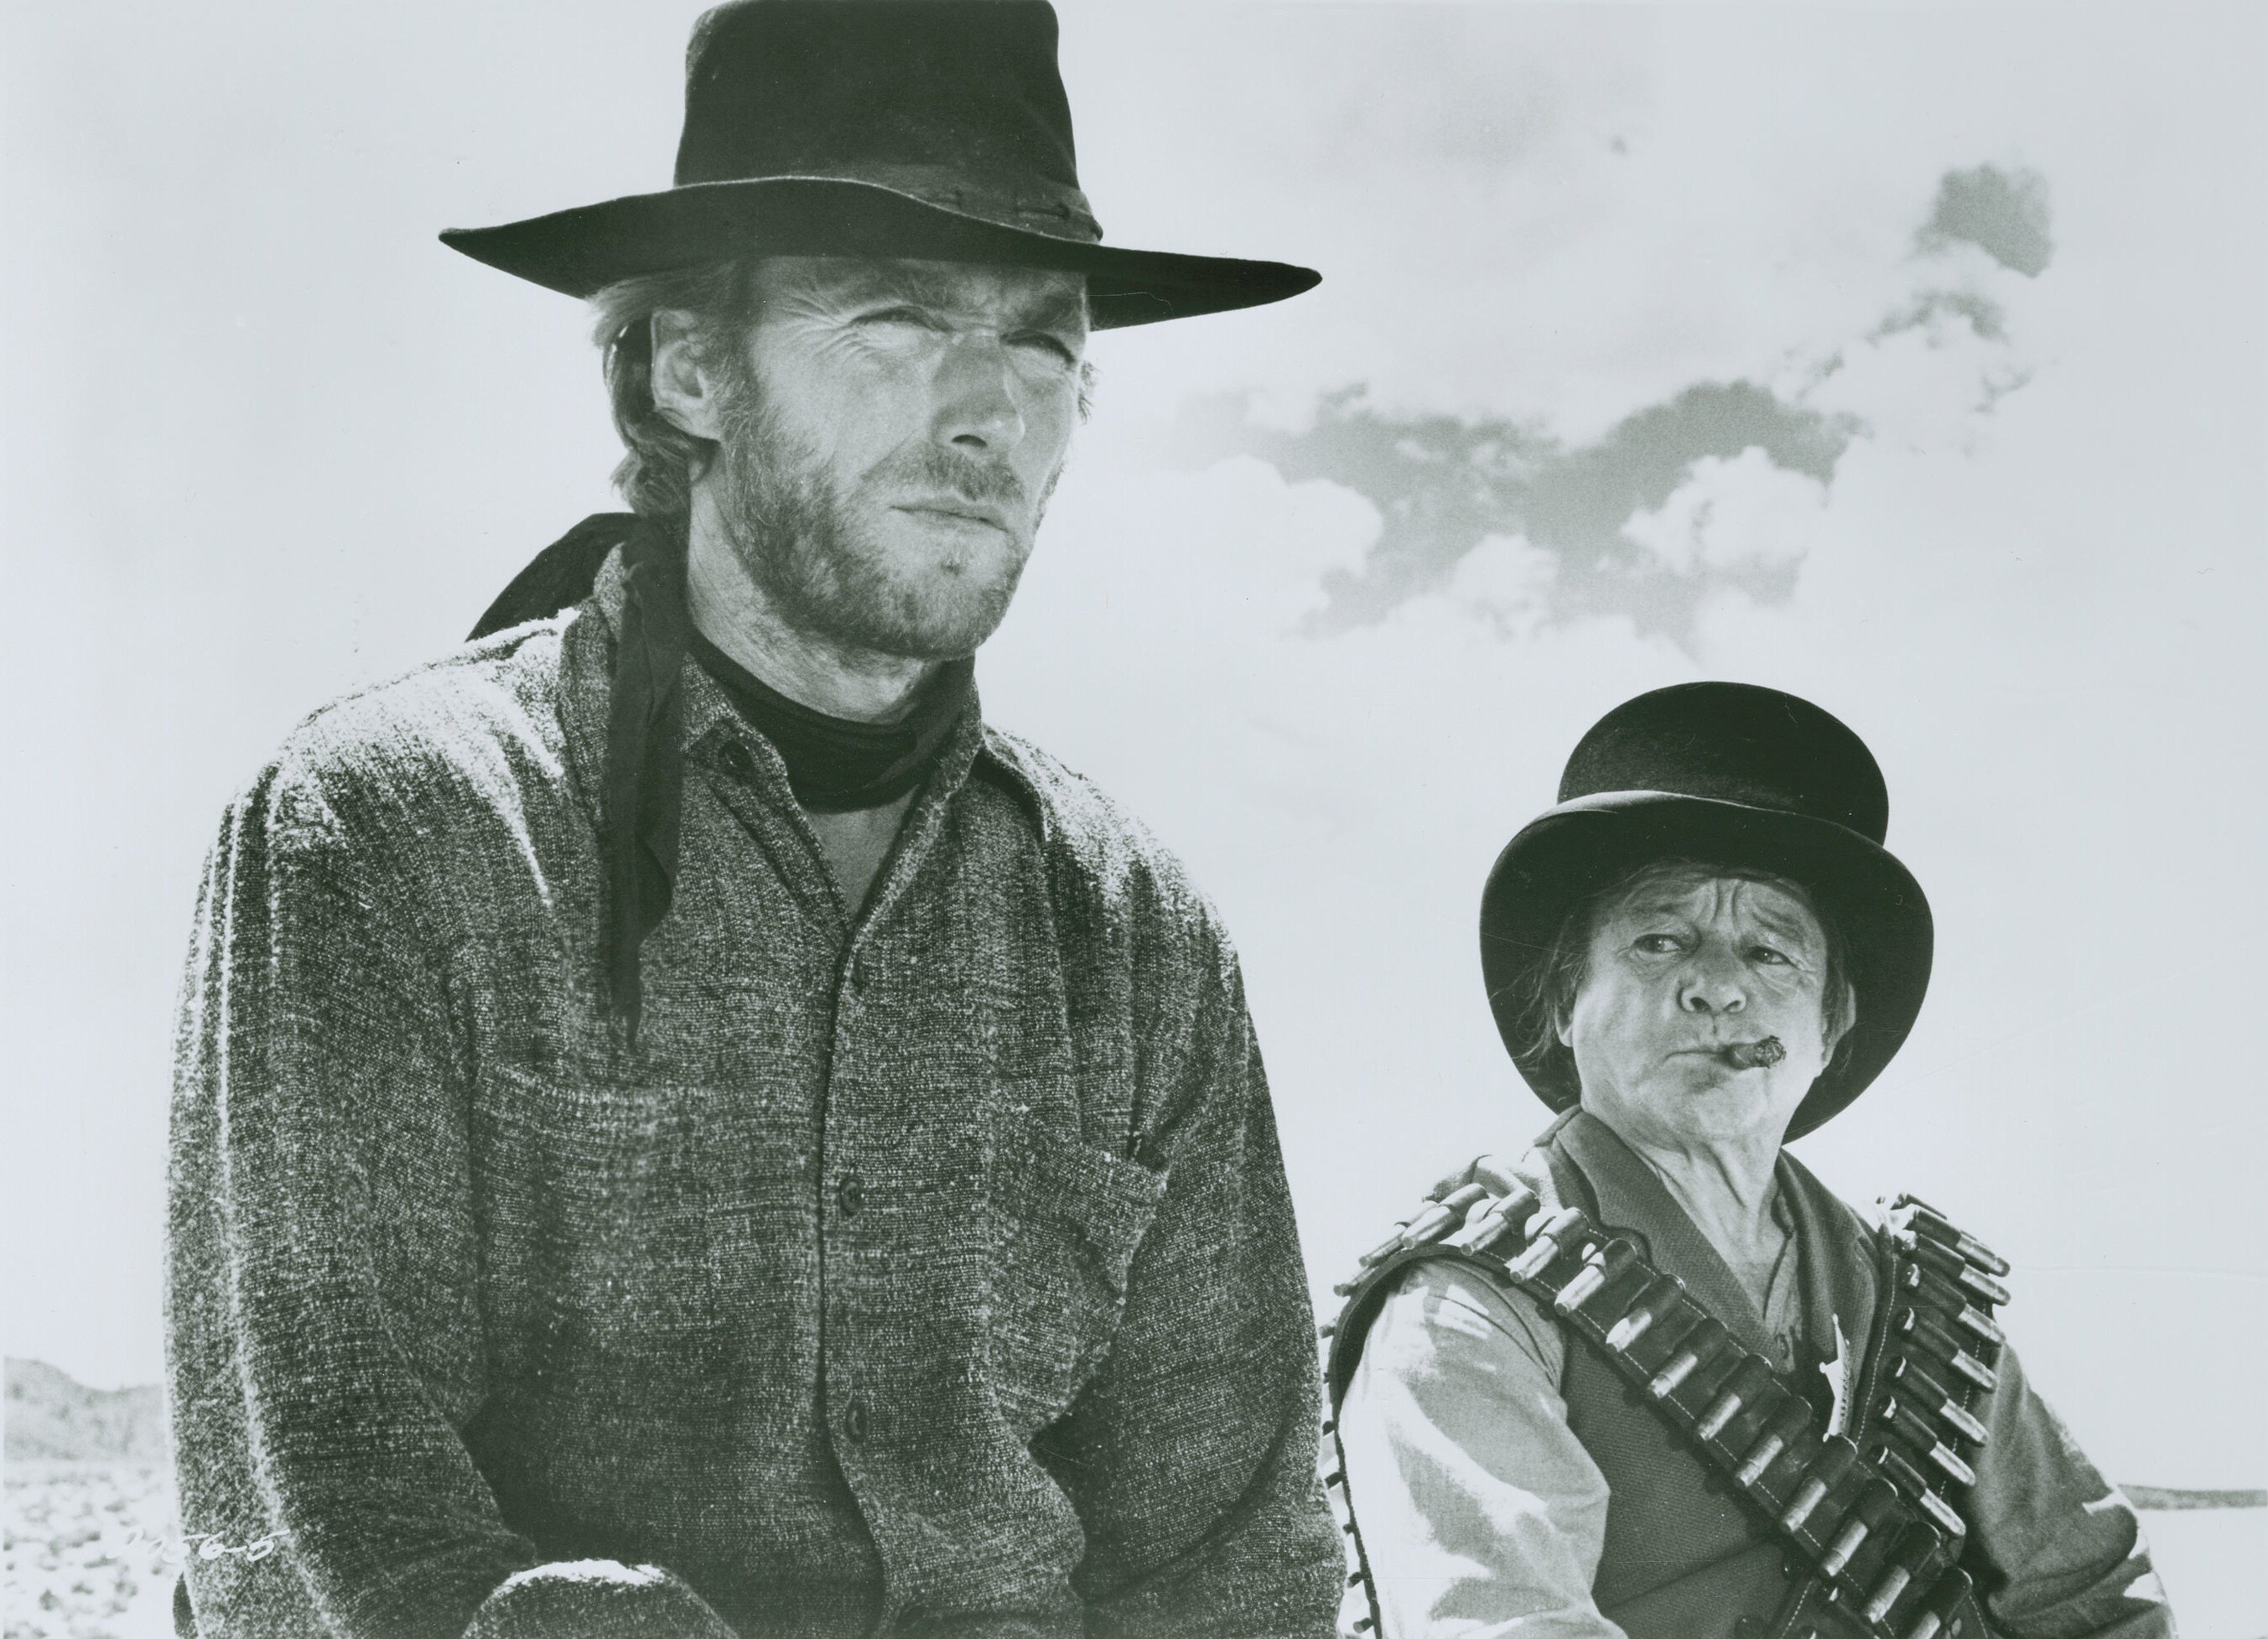 Clint Eastwood: Billy Curtis, An American Film And Television Actor With Dwarfism, "High Plains Drifter" Film Of 1973, Monochrome. 2710x1960 HD Background.